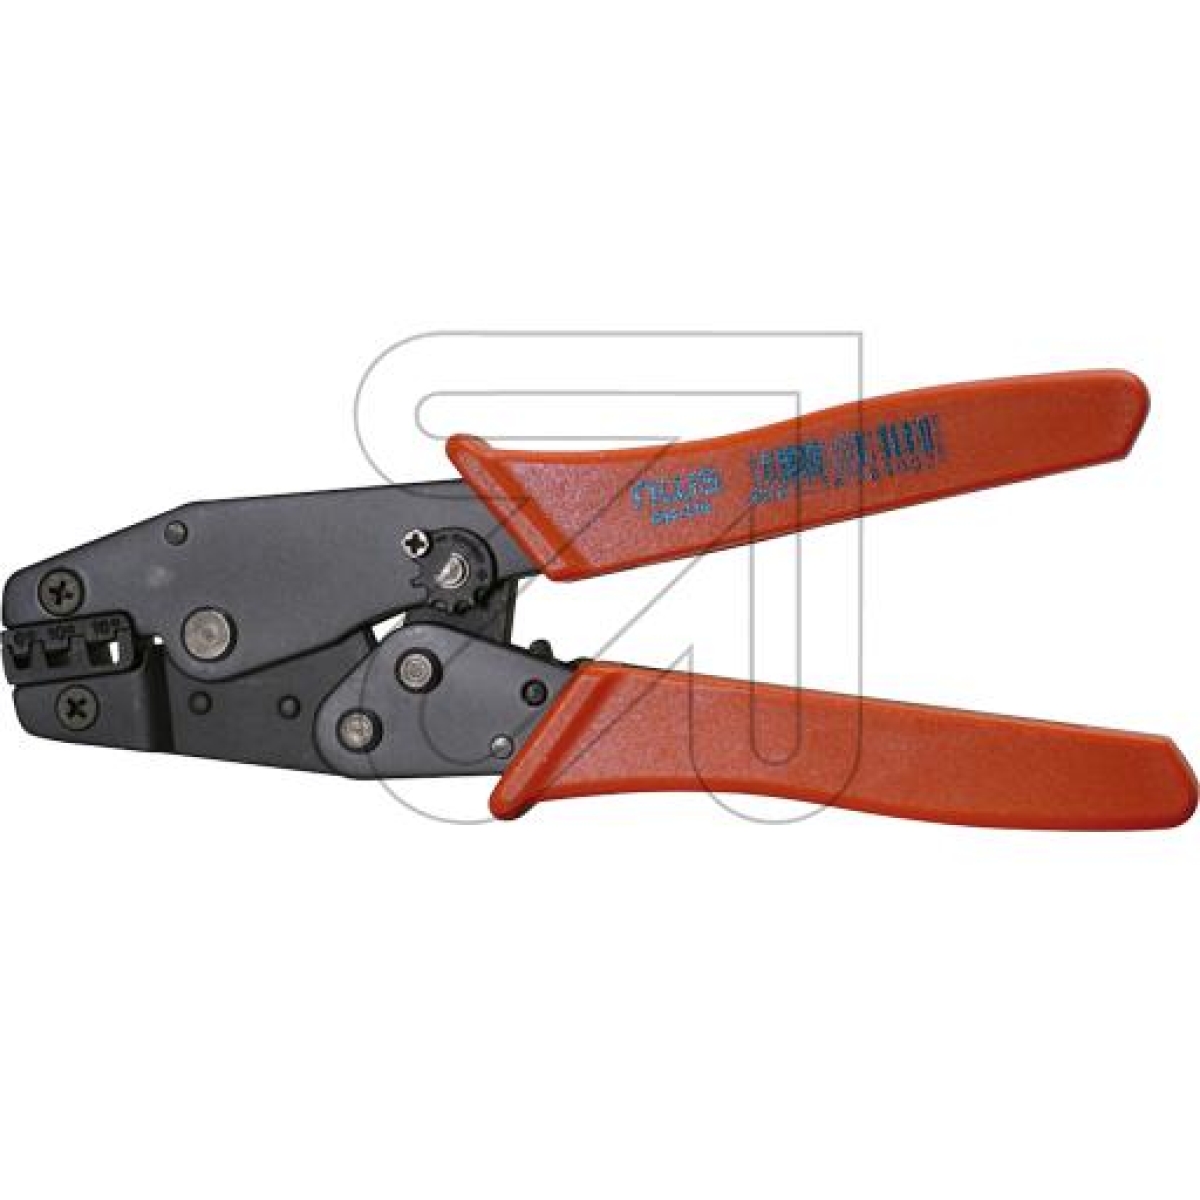 NWSLever crimping pliers for wire end sleeves 6-16 584-210